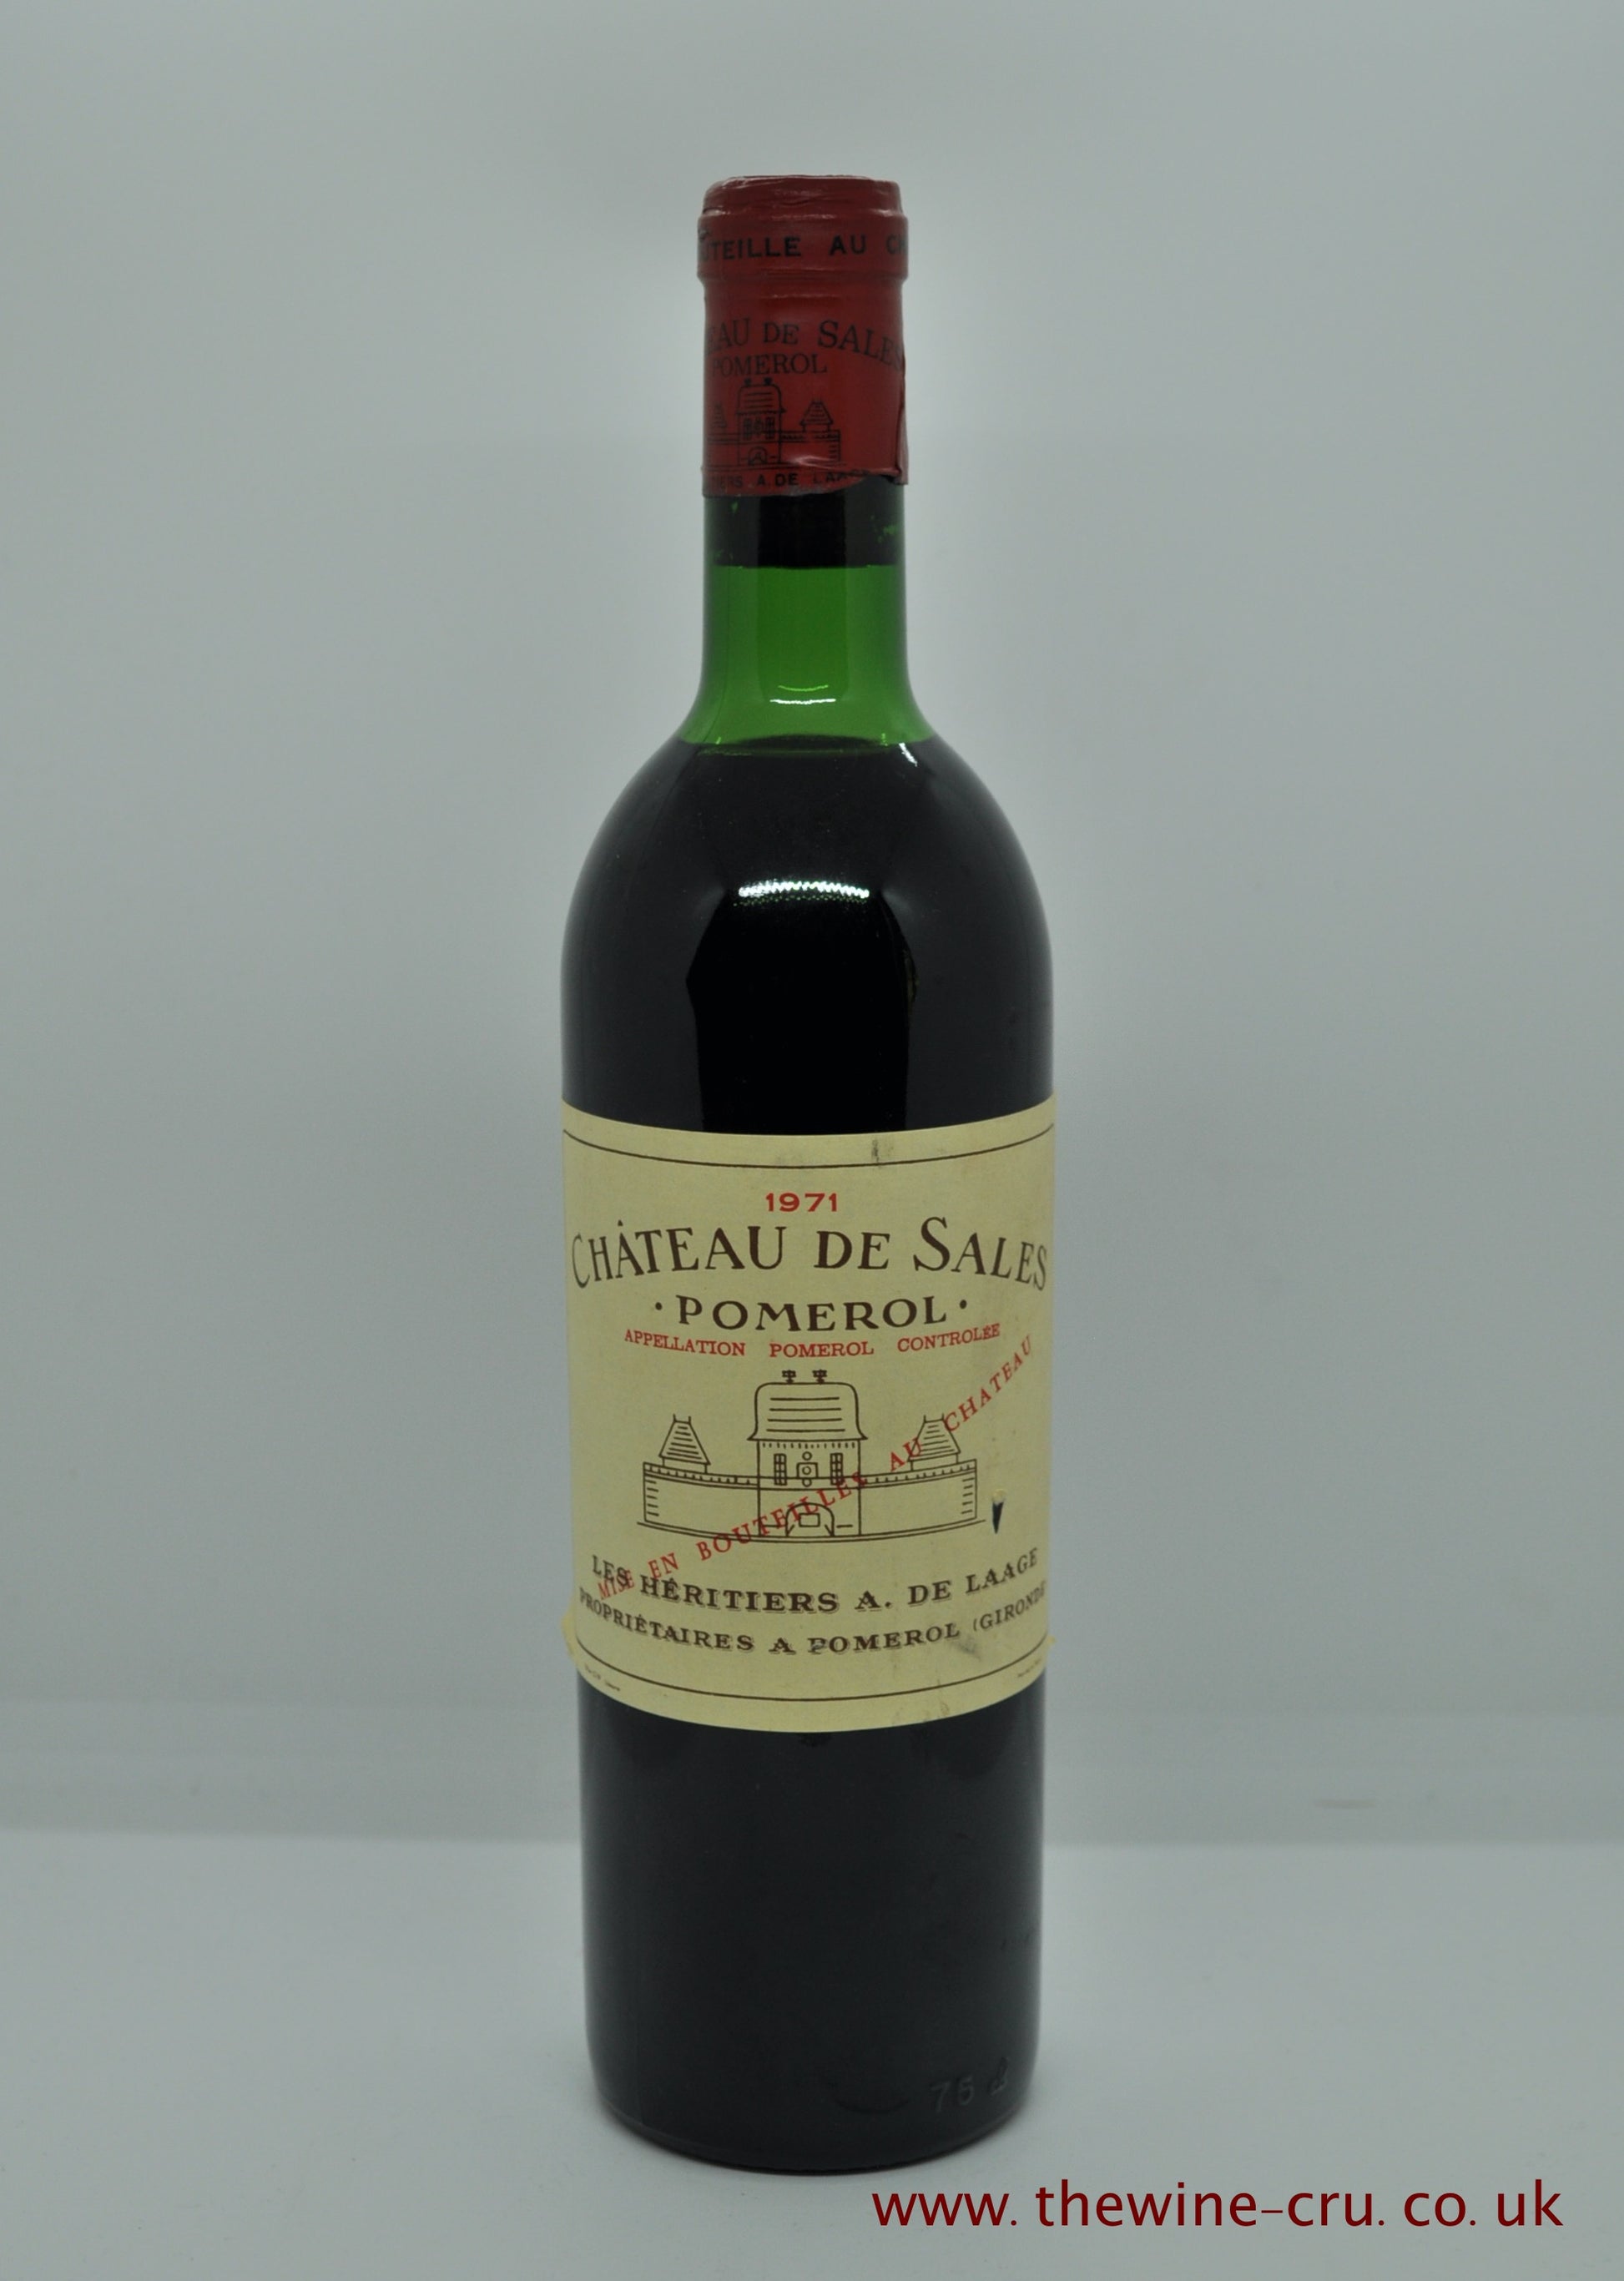 A  bottle of 1971 vintage red wine. Chateau De Sales 1971. France Bordeaux. The capsule and label are good with the wine level top shoulder. Immediate delivery. Free local delivery. Gift wrapping available.